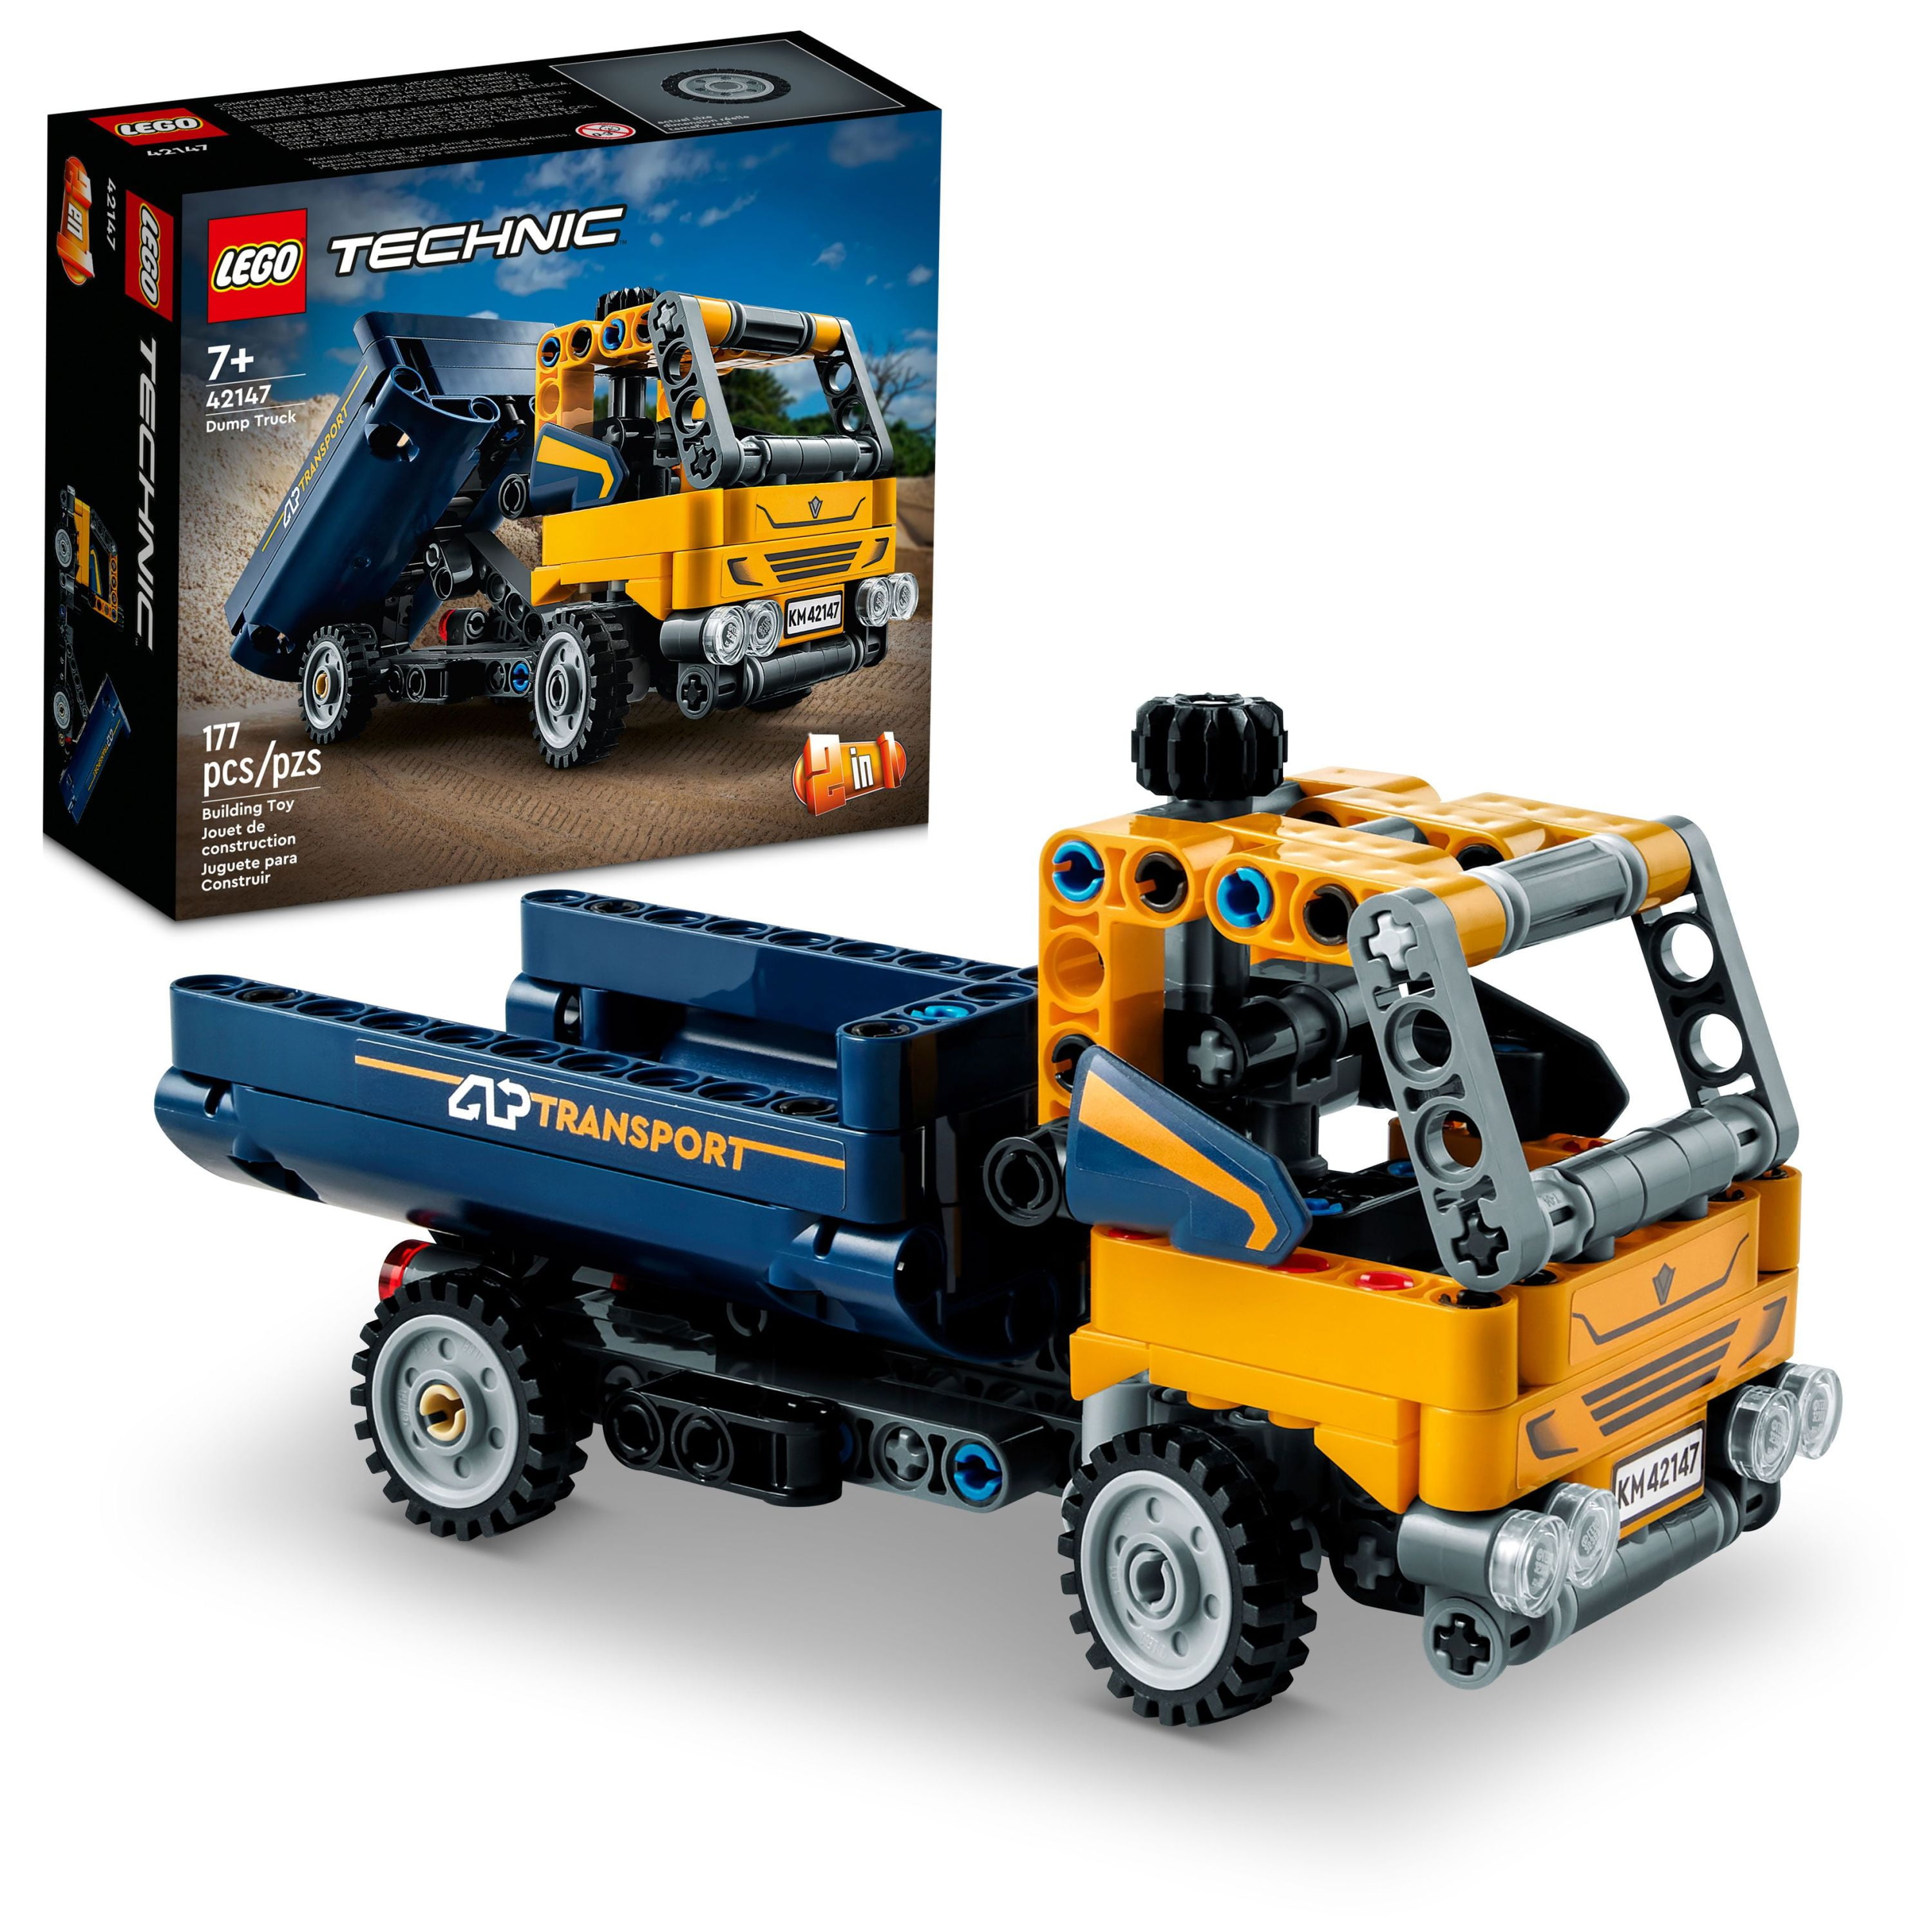 Morgenøvelser sorg At bygge LEGO Technic Dump Truck 2in1 Toy Building Set 42147, Model Construction  Vehicle and Excavator Digger Kit, Engineering Building Toys for Back to  School, Gift for Kids, Boys, Girls Ages 7+ Years Old -